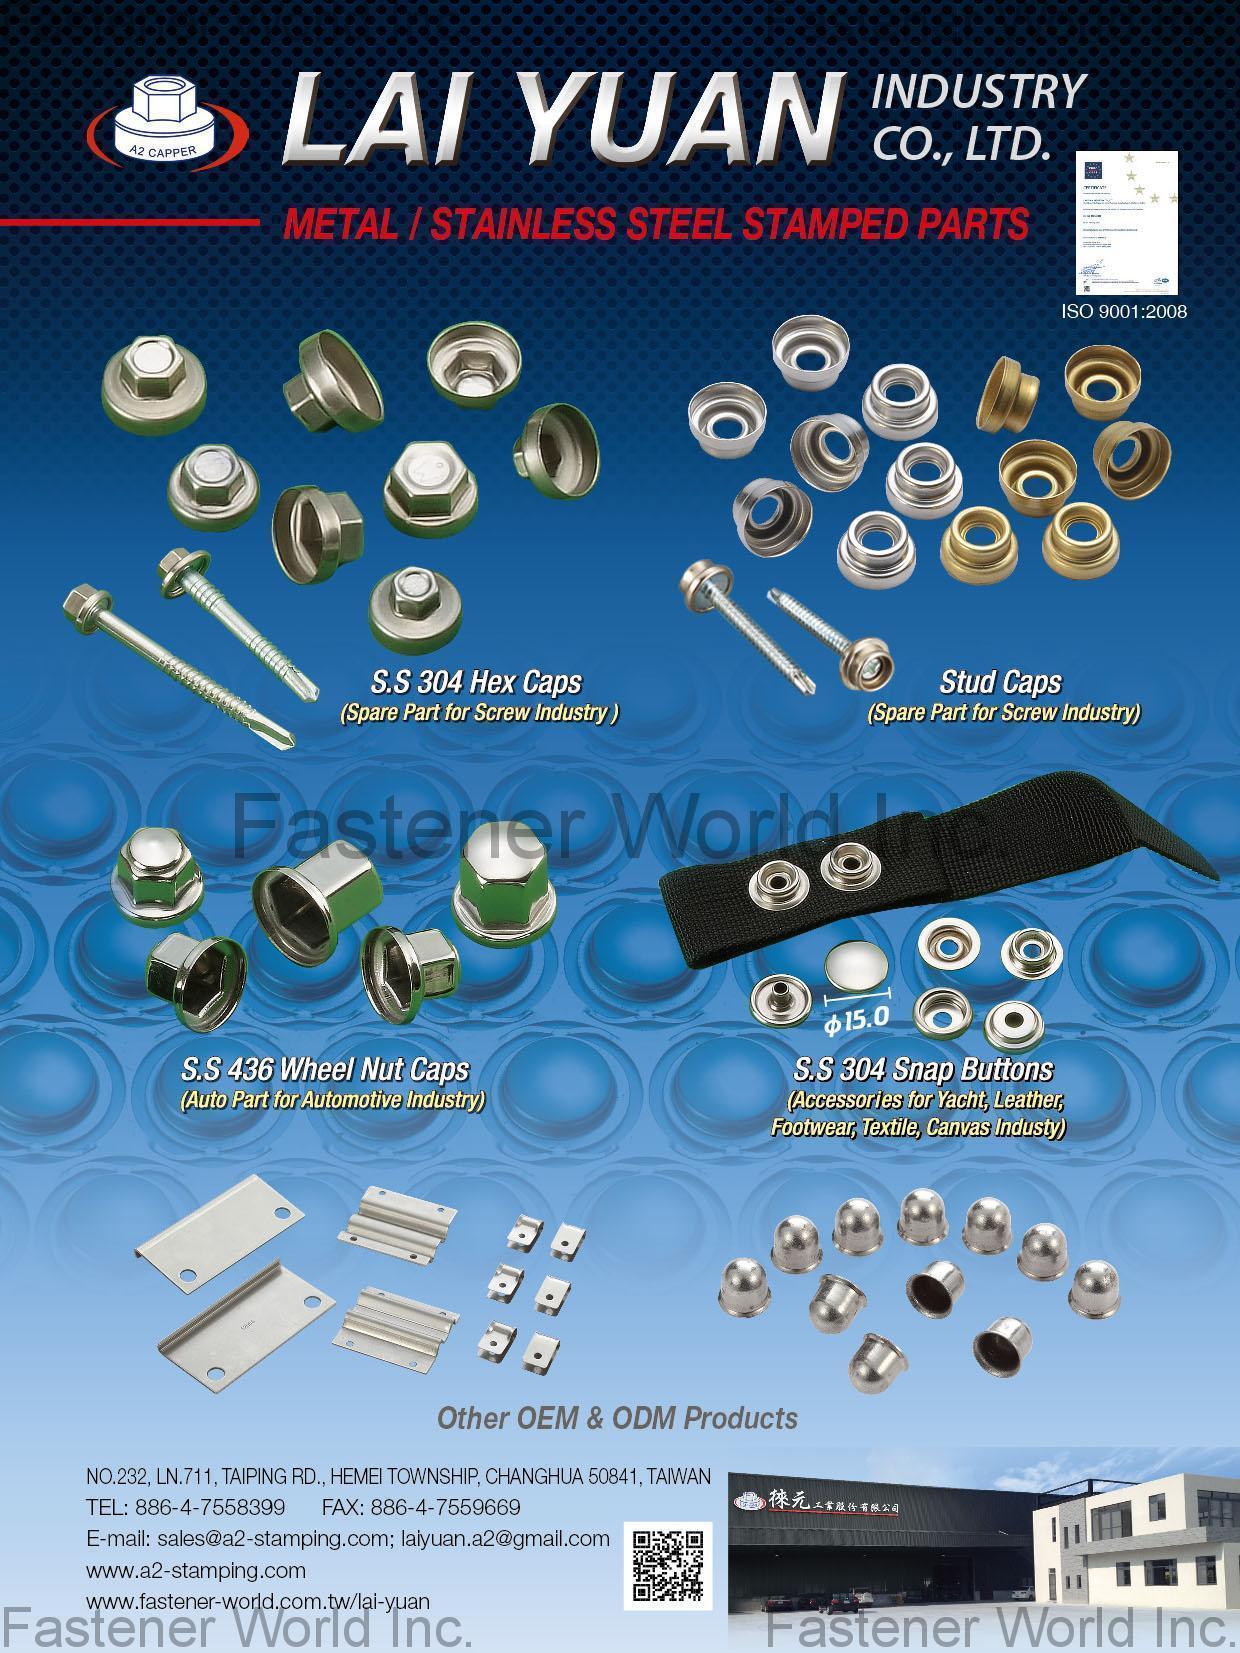 LAI YUAN INDUSTRY CO., LTD.  , Metal / Stainless Steel Stamped Parts, Stud Caps, S.S.304 Hex Caps, S.S 436 Wheel Nut Caps, S.S. 304 Snap Buttons , Stamped Parts